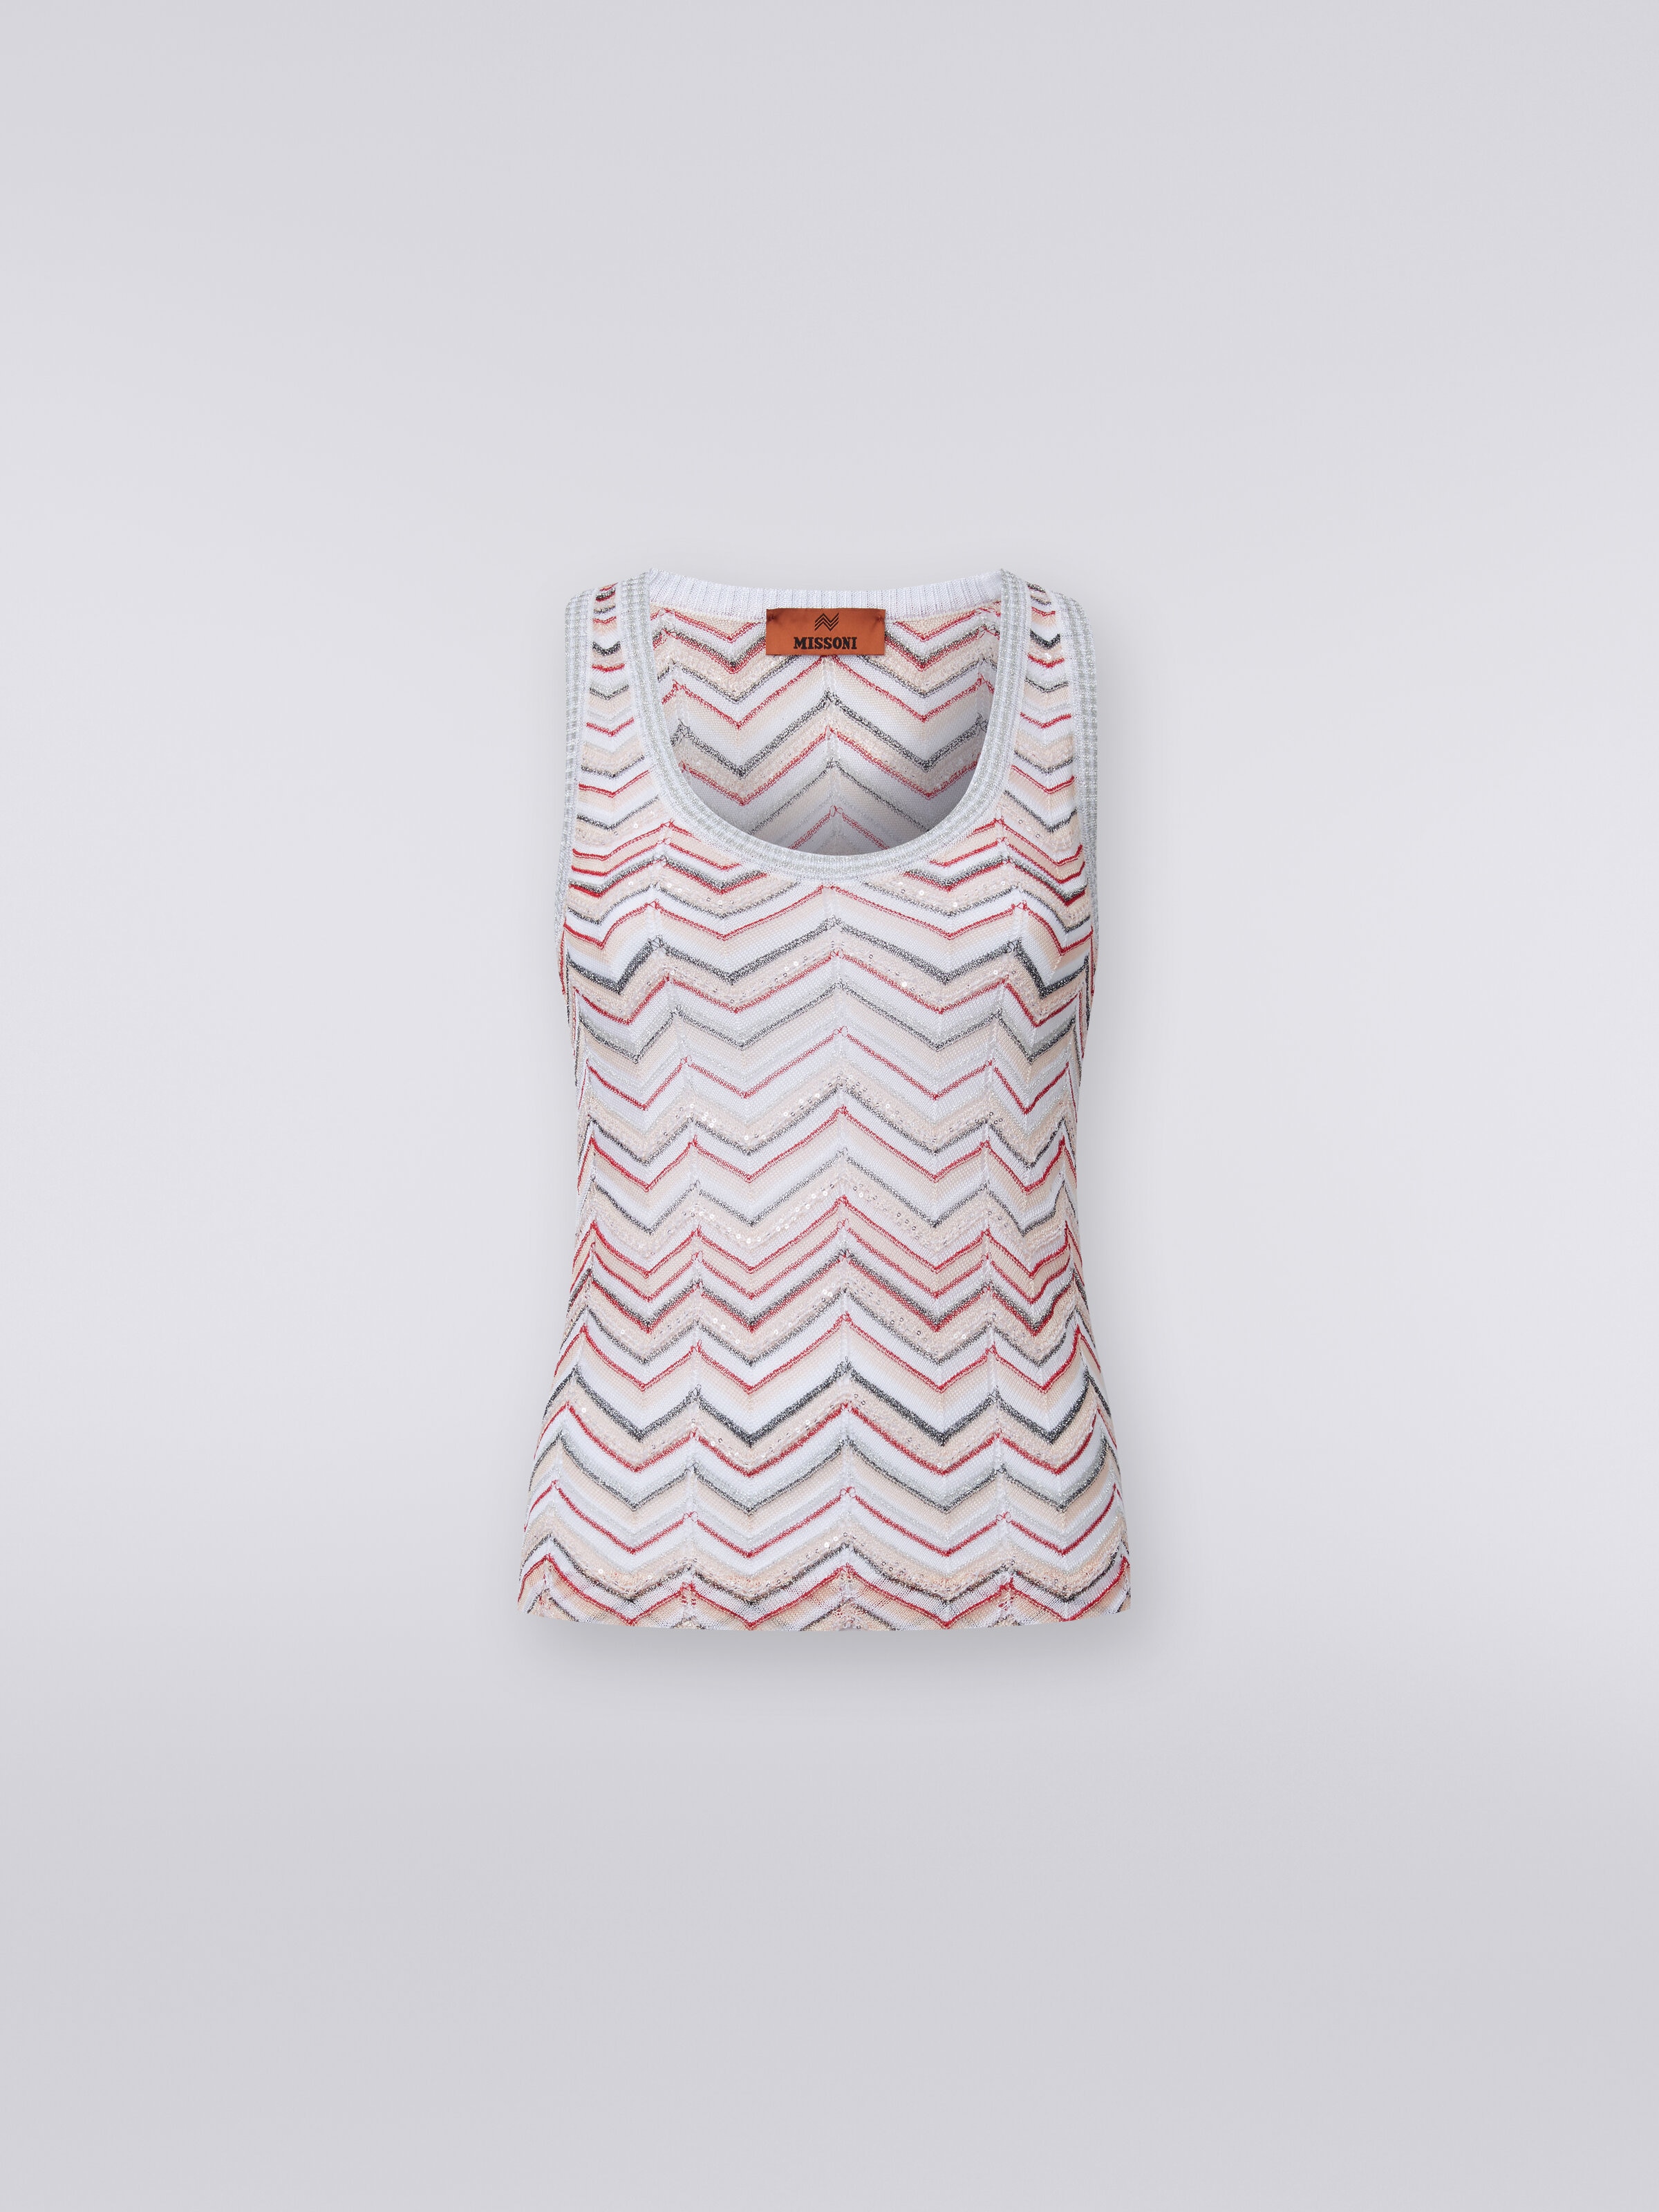 Tank top in zigzag knit with lurex and sequins, Multicoloured  - 0